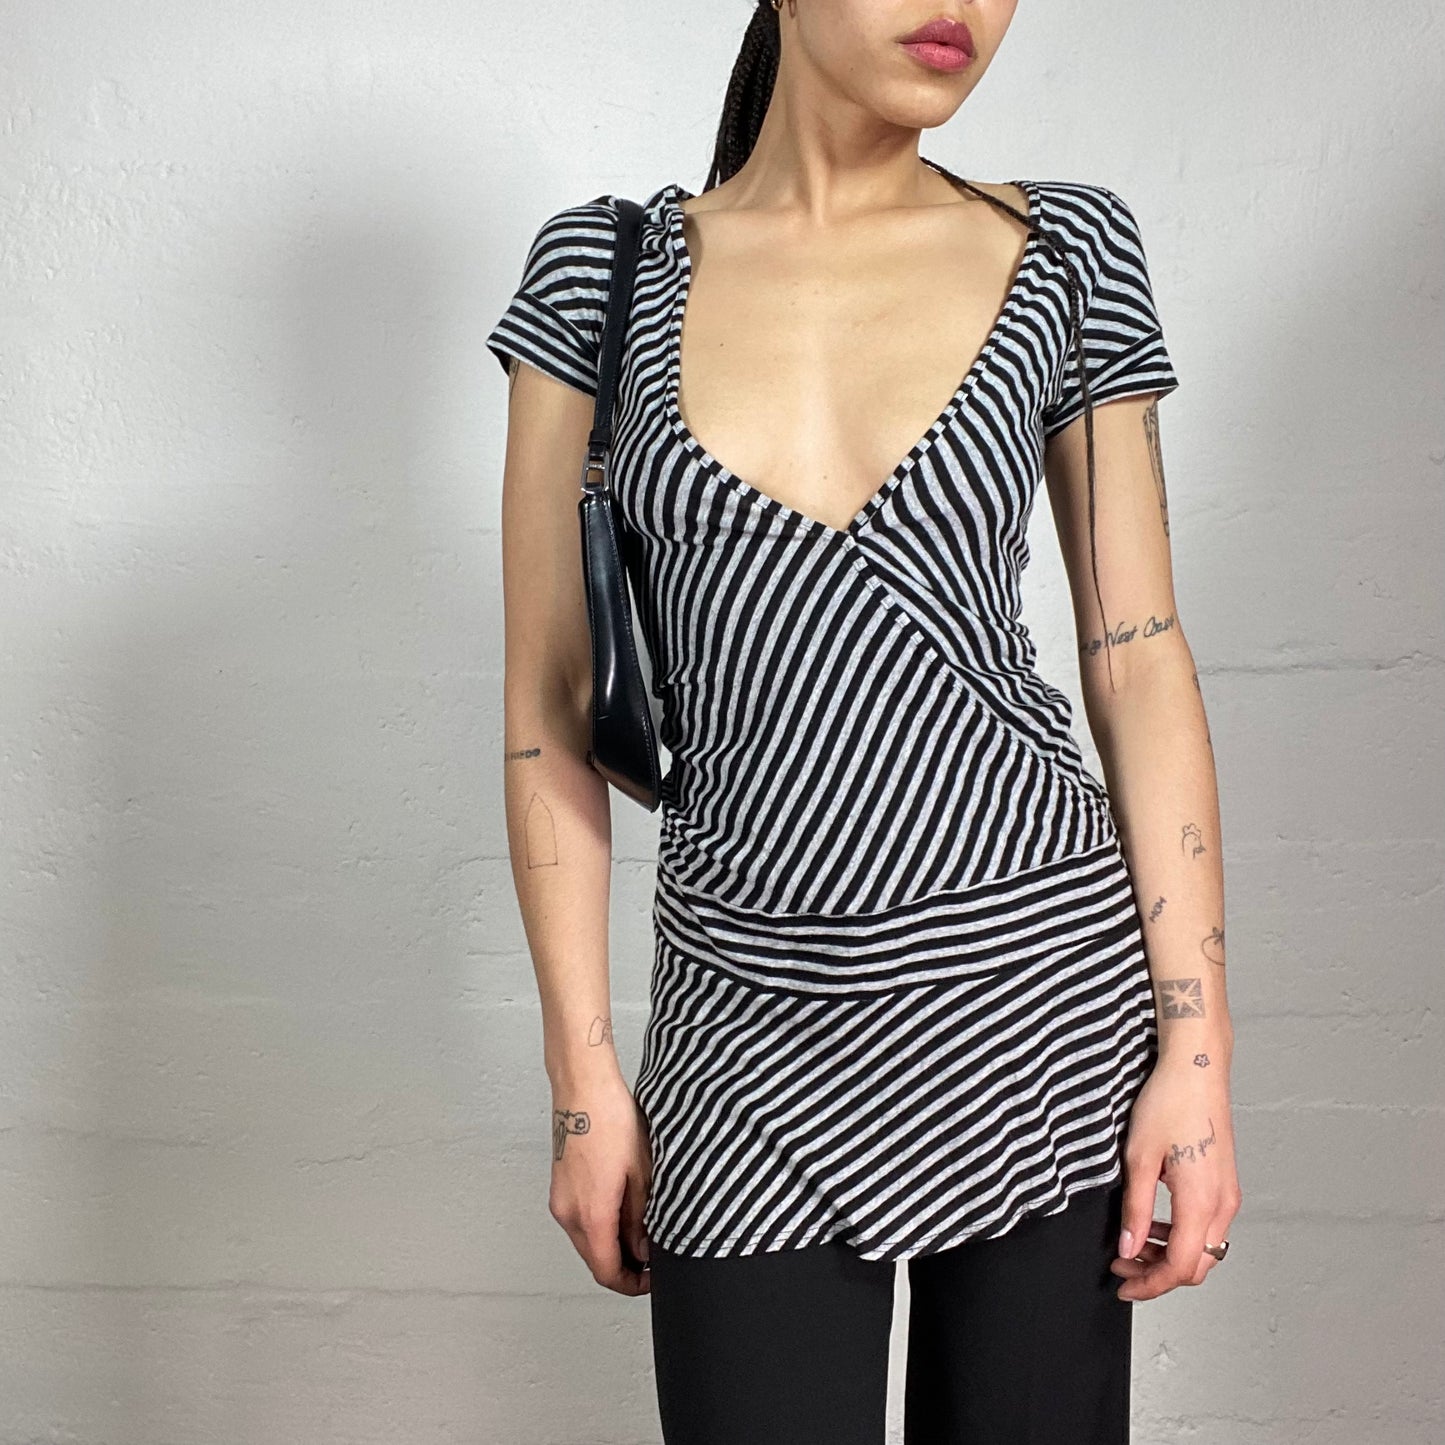 Vintage 2000's Coquette Striped Black and Grey Dress Style Shortsleeved Top with V-Chest Cut (S)